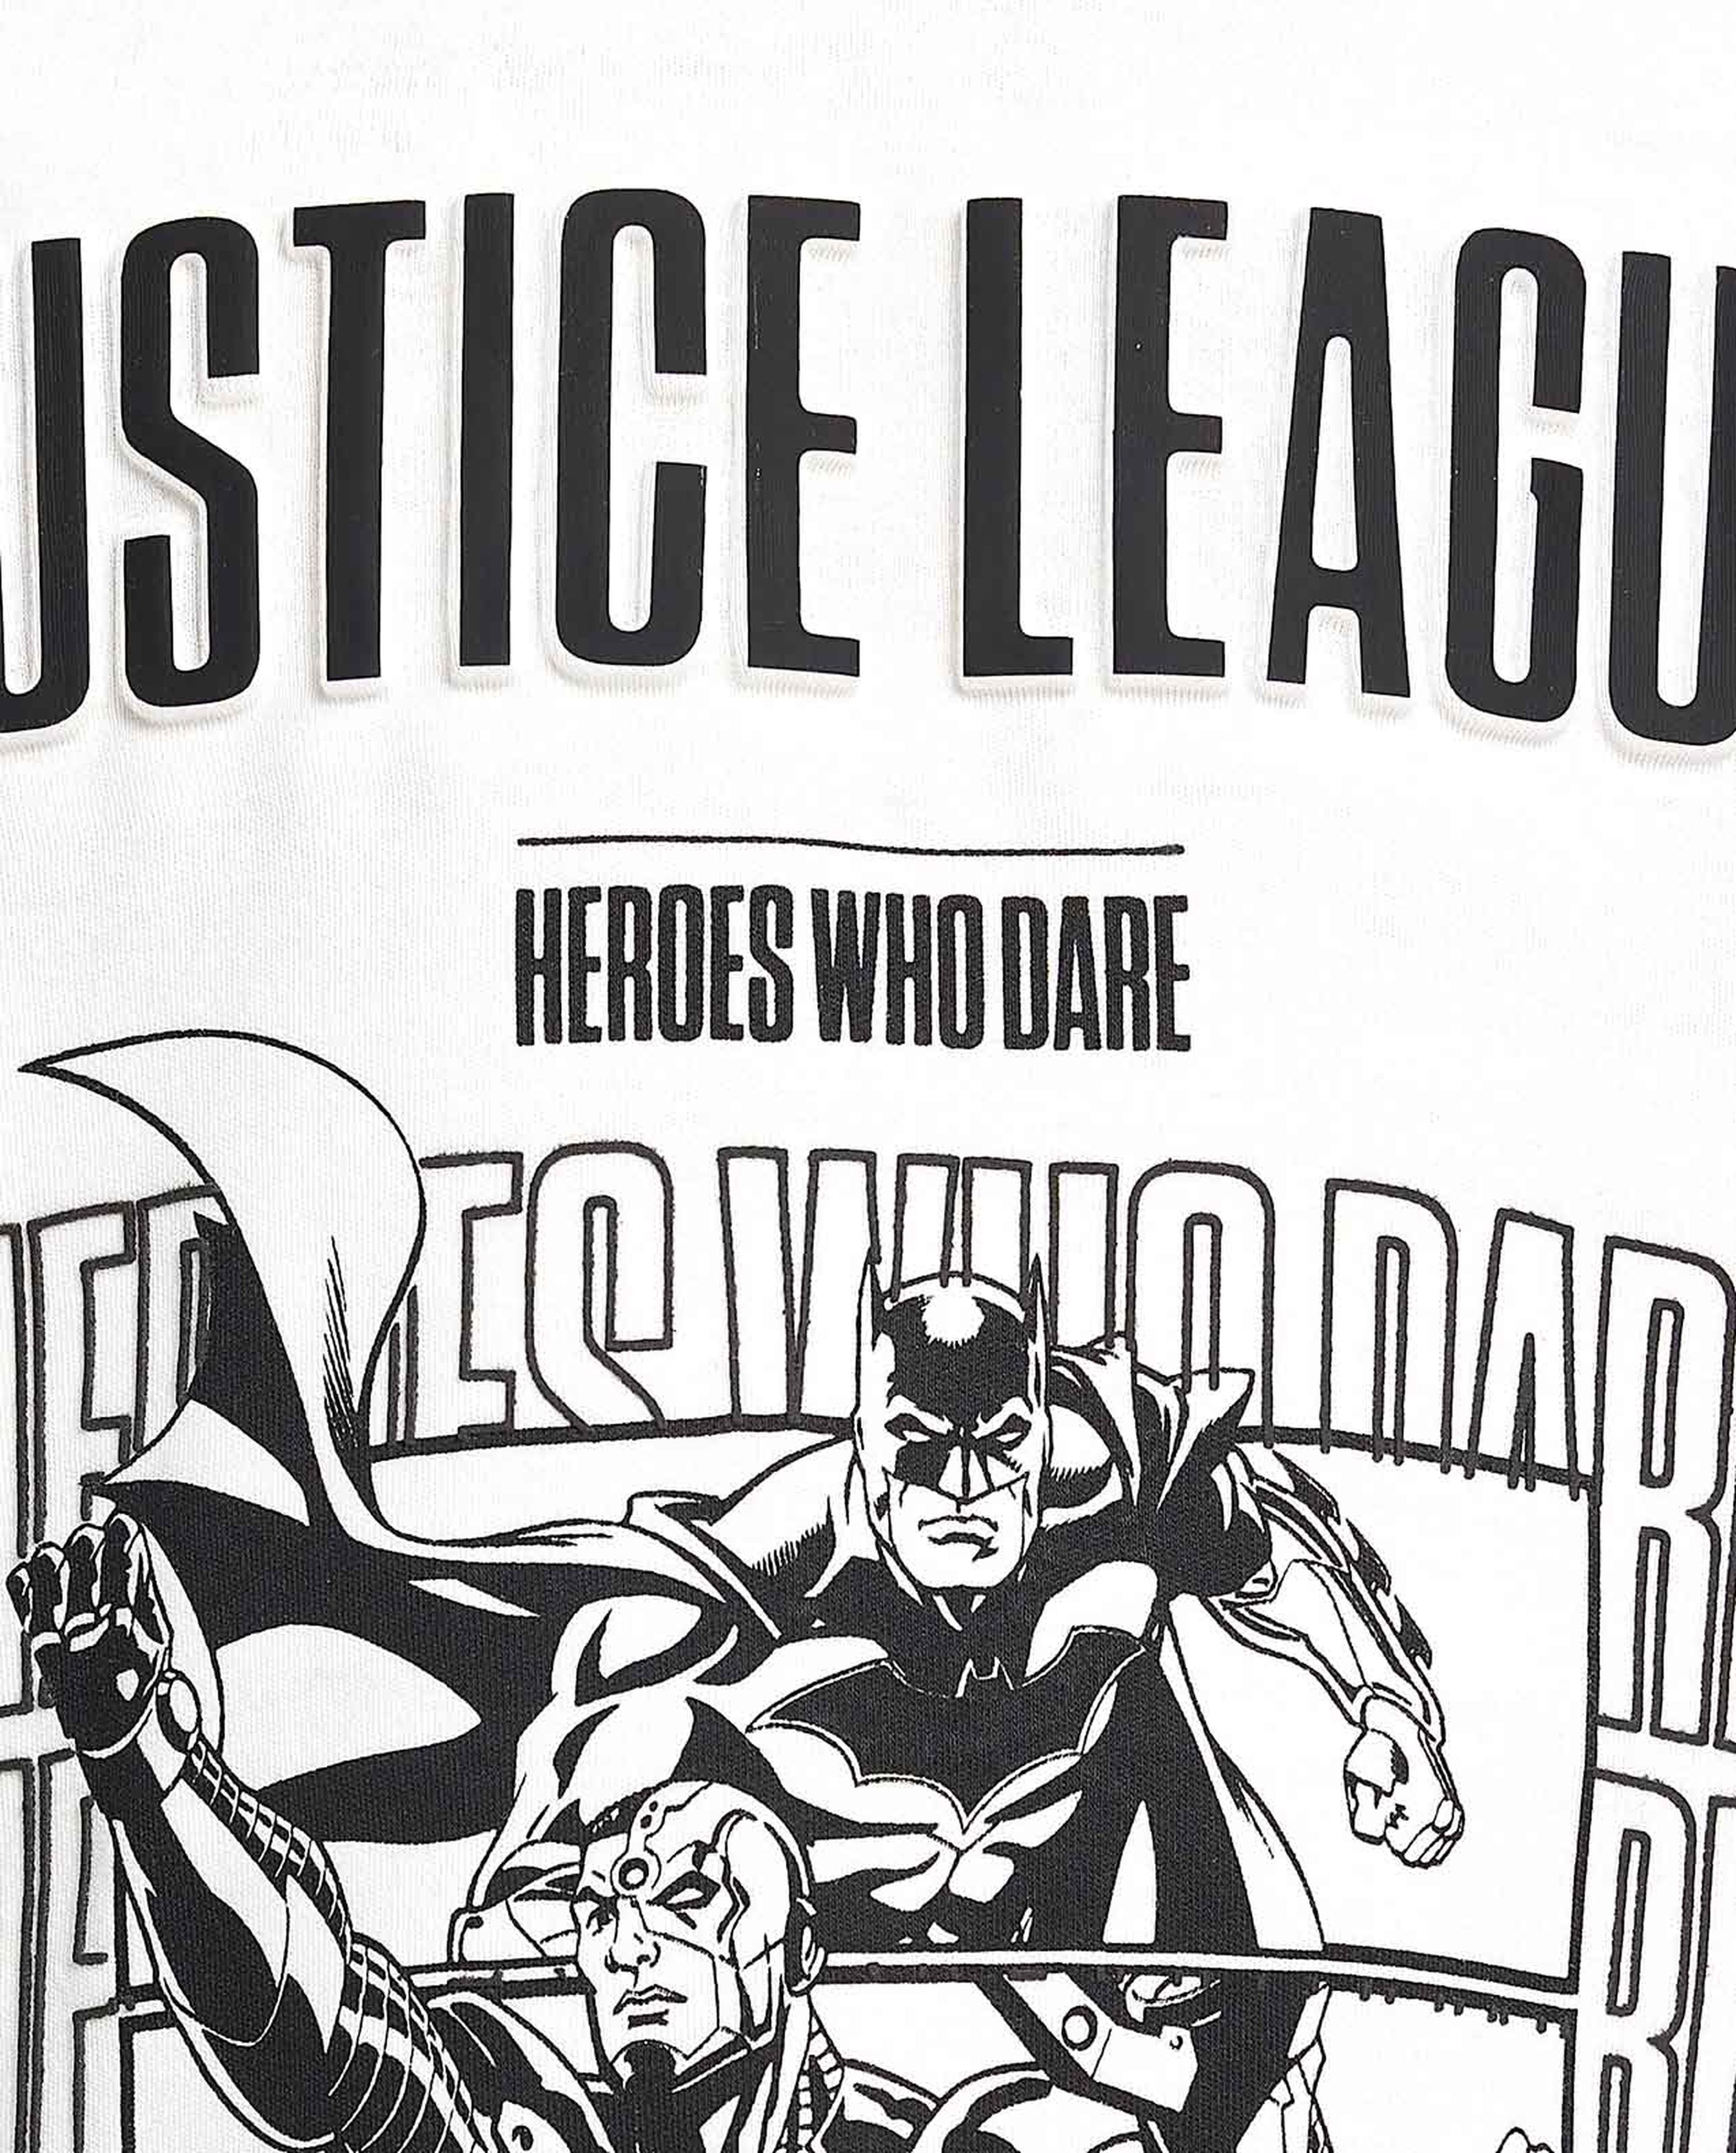 Justice League Printed T-Shirt with Crew Neck and Short Sleeves